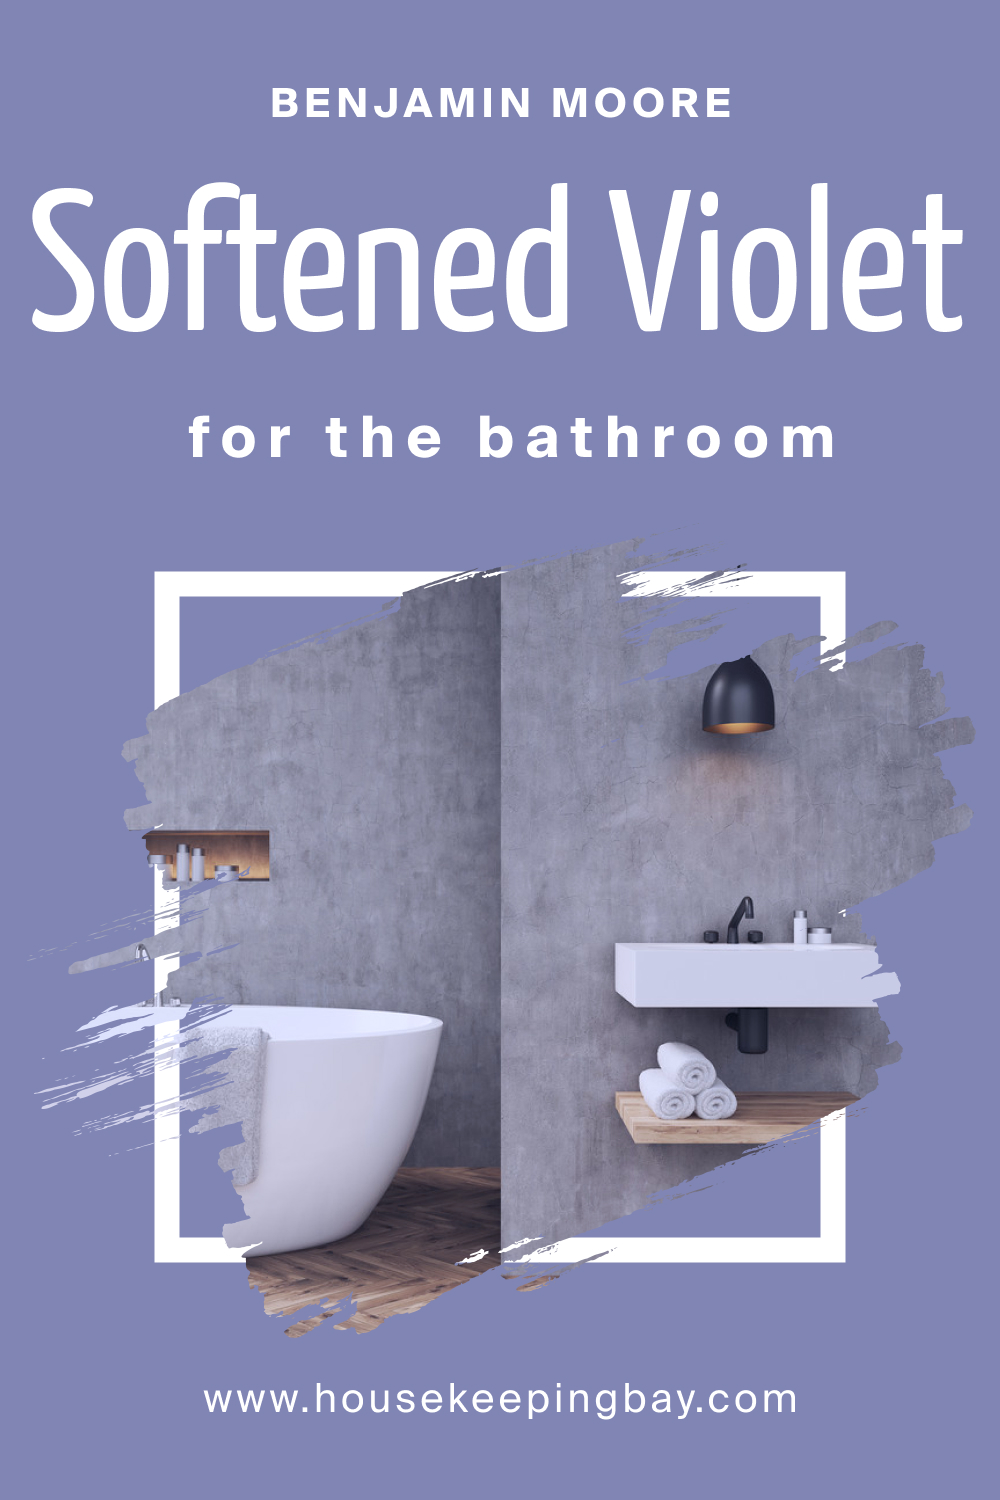 How to Use BM Softened Violet 1420 in the Bathroom?